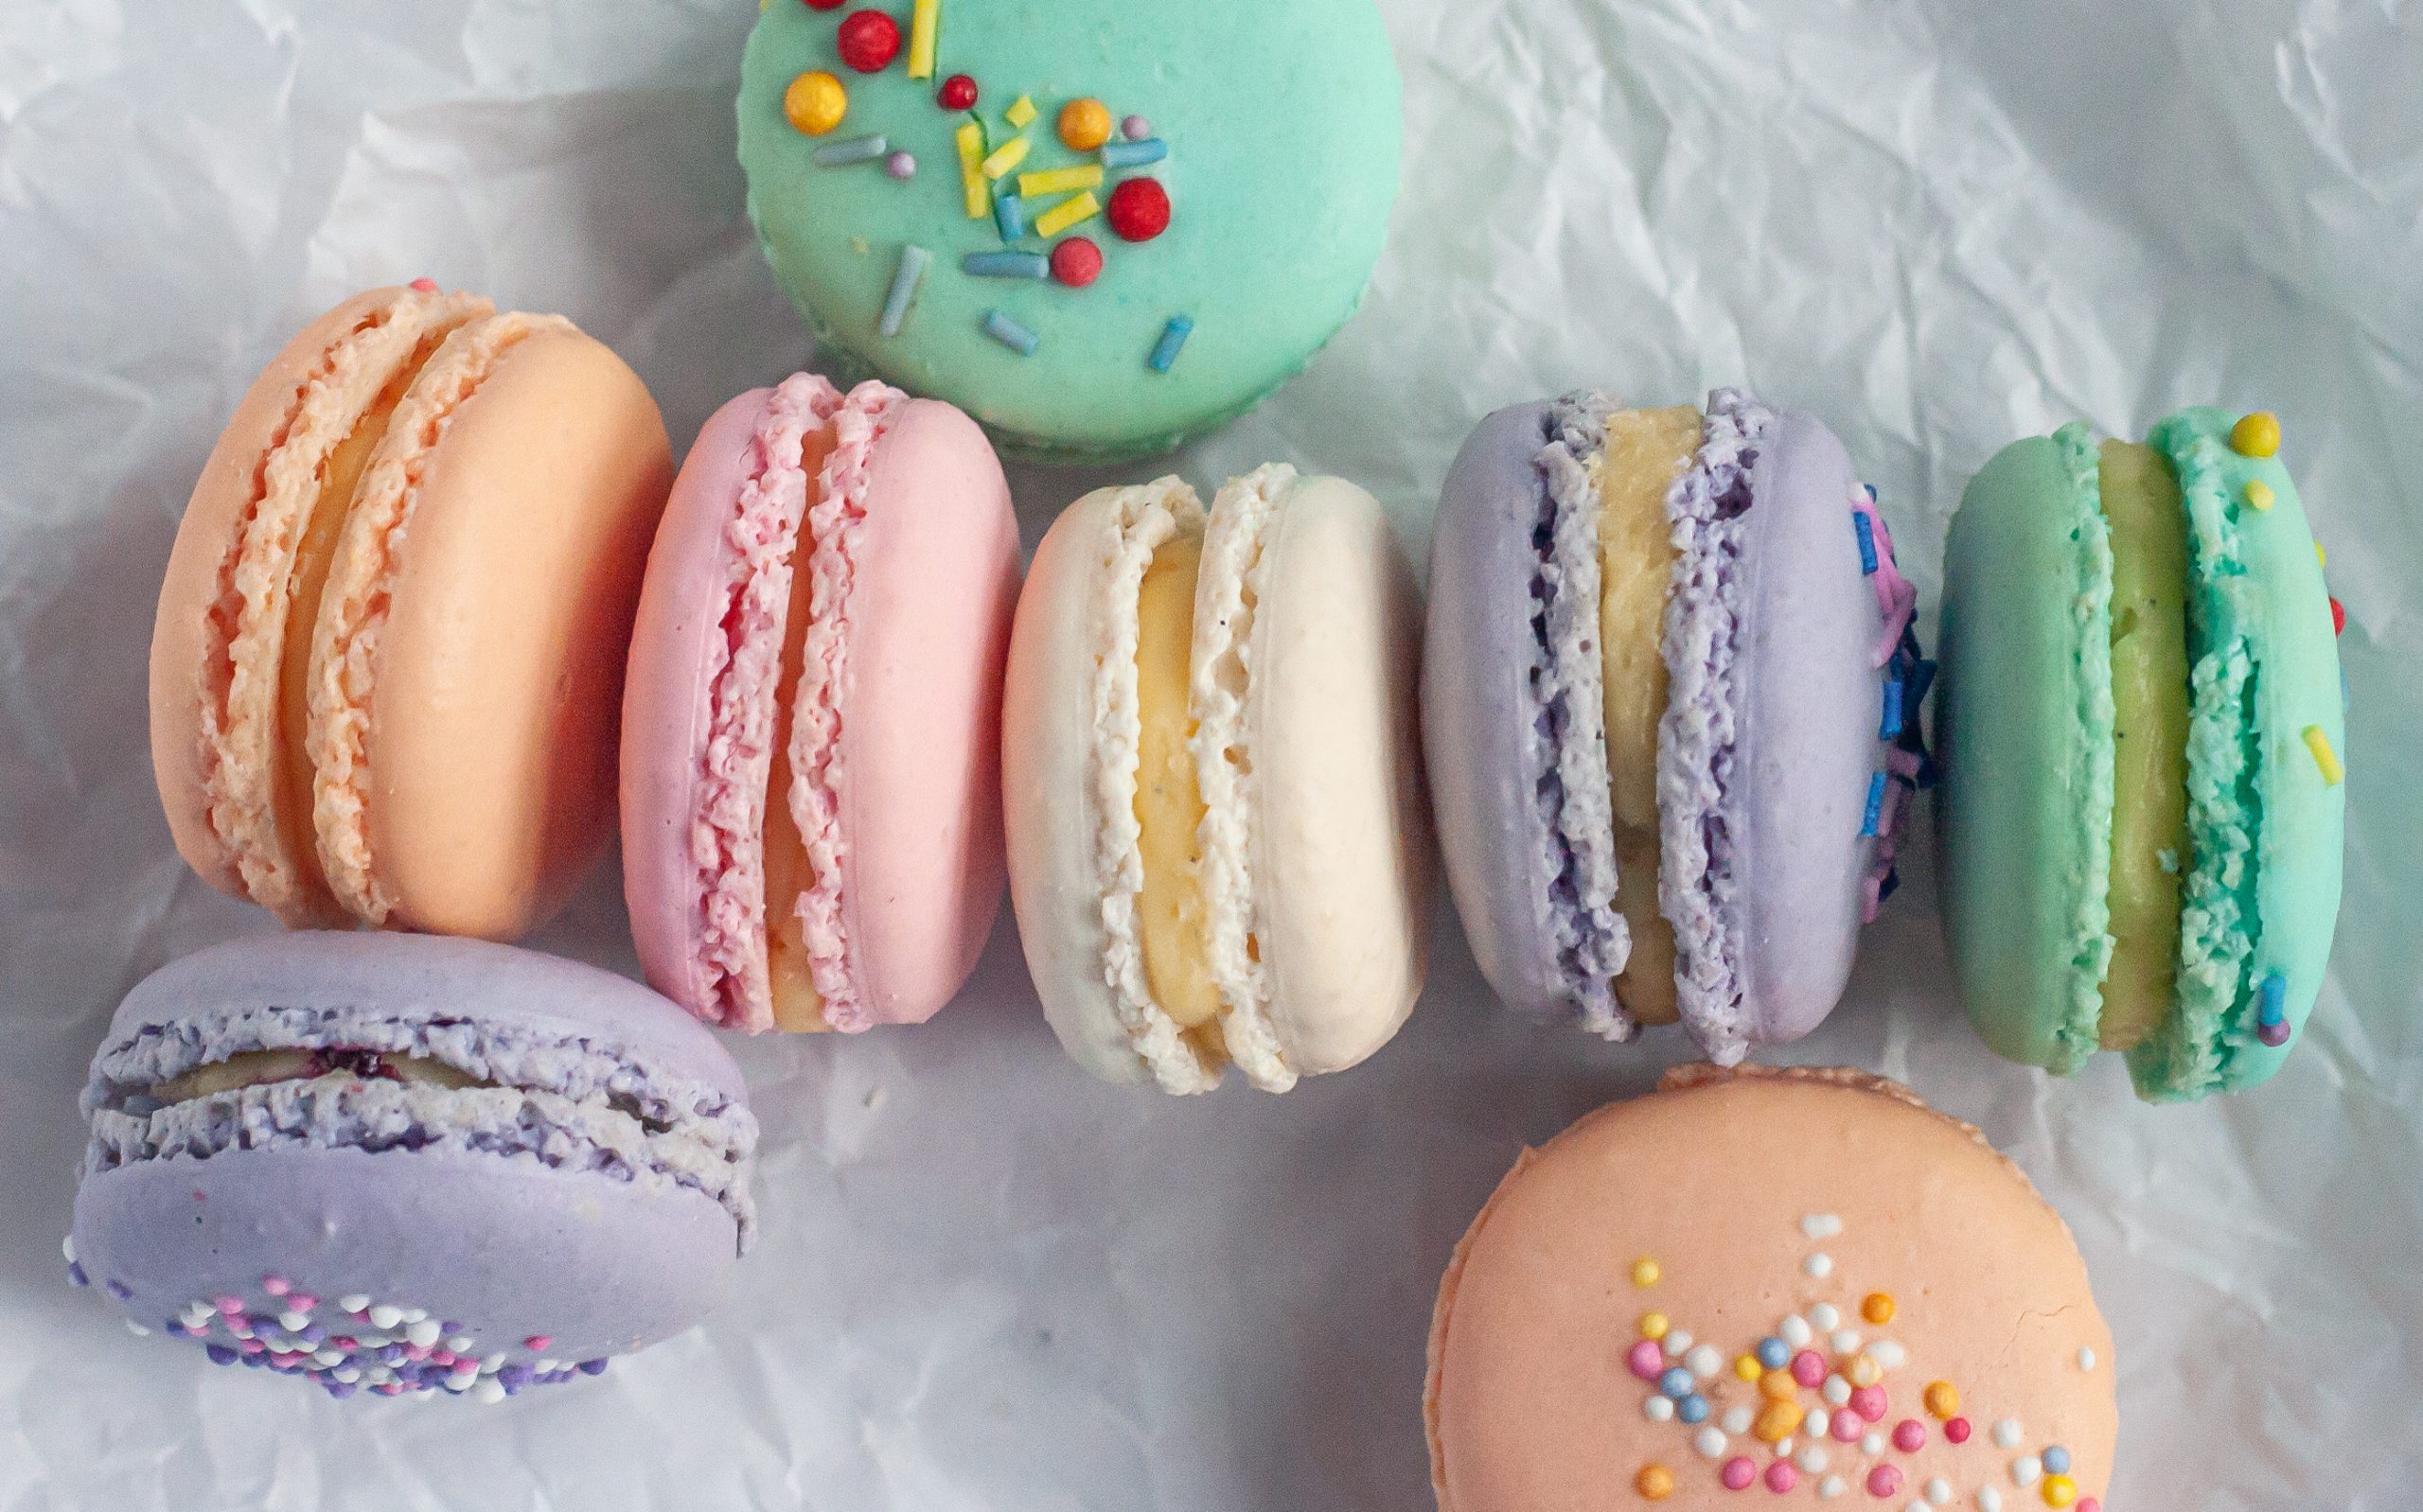 Discovering macarons in Bournemouth with La Maison Macaron